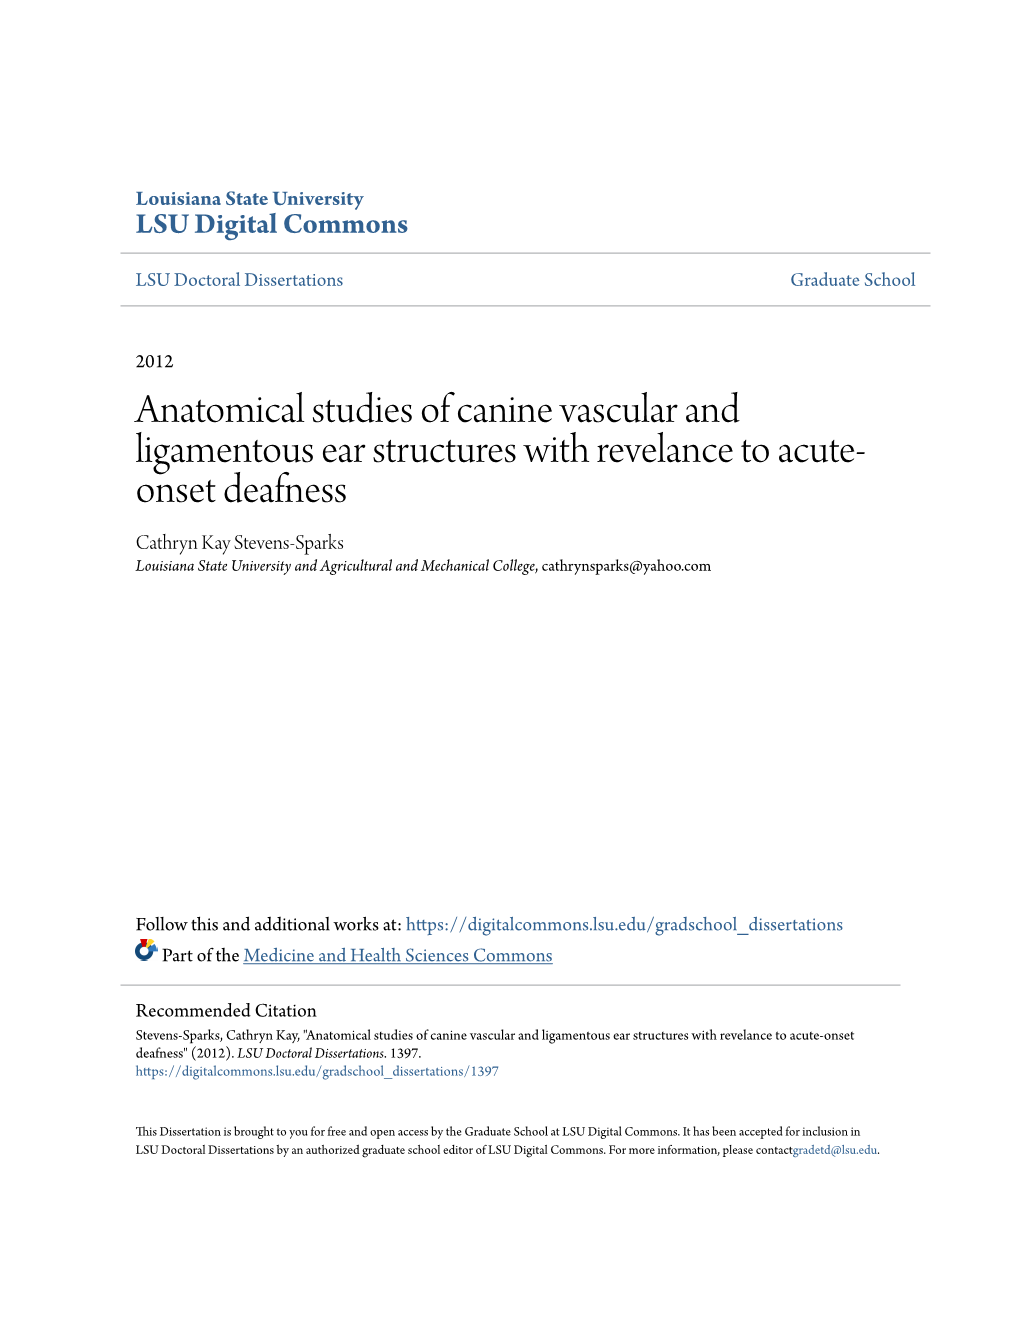 Anatomical Studies of Canine Vascular and Ligamentous Ear Structures with Revelance to Acute-Onset Deafness" (2012)